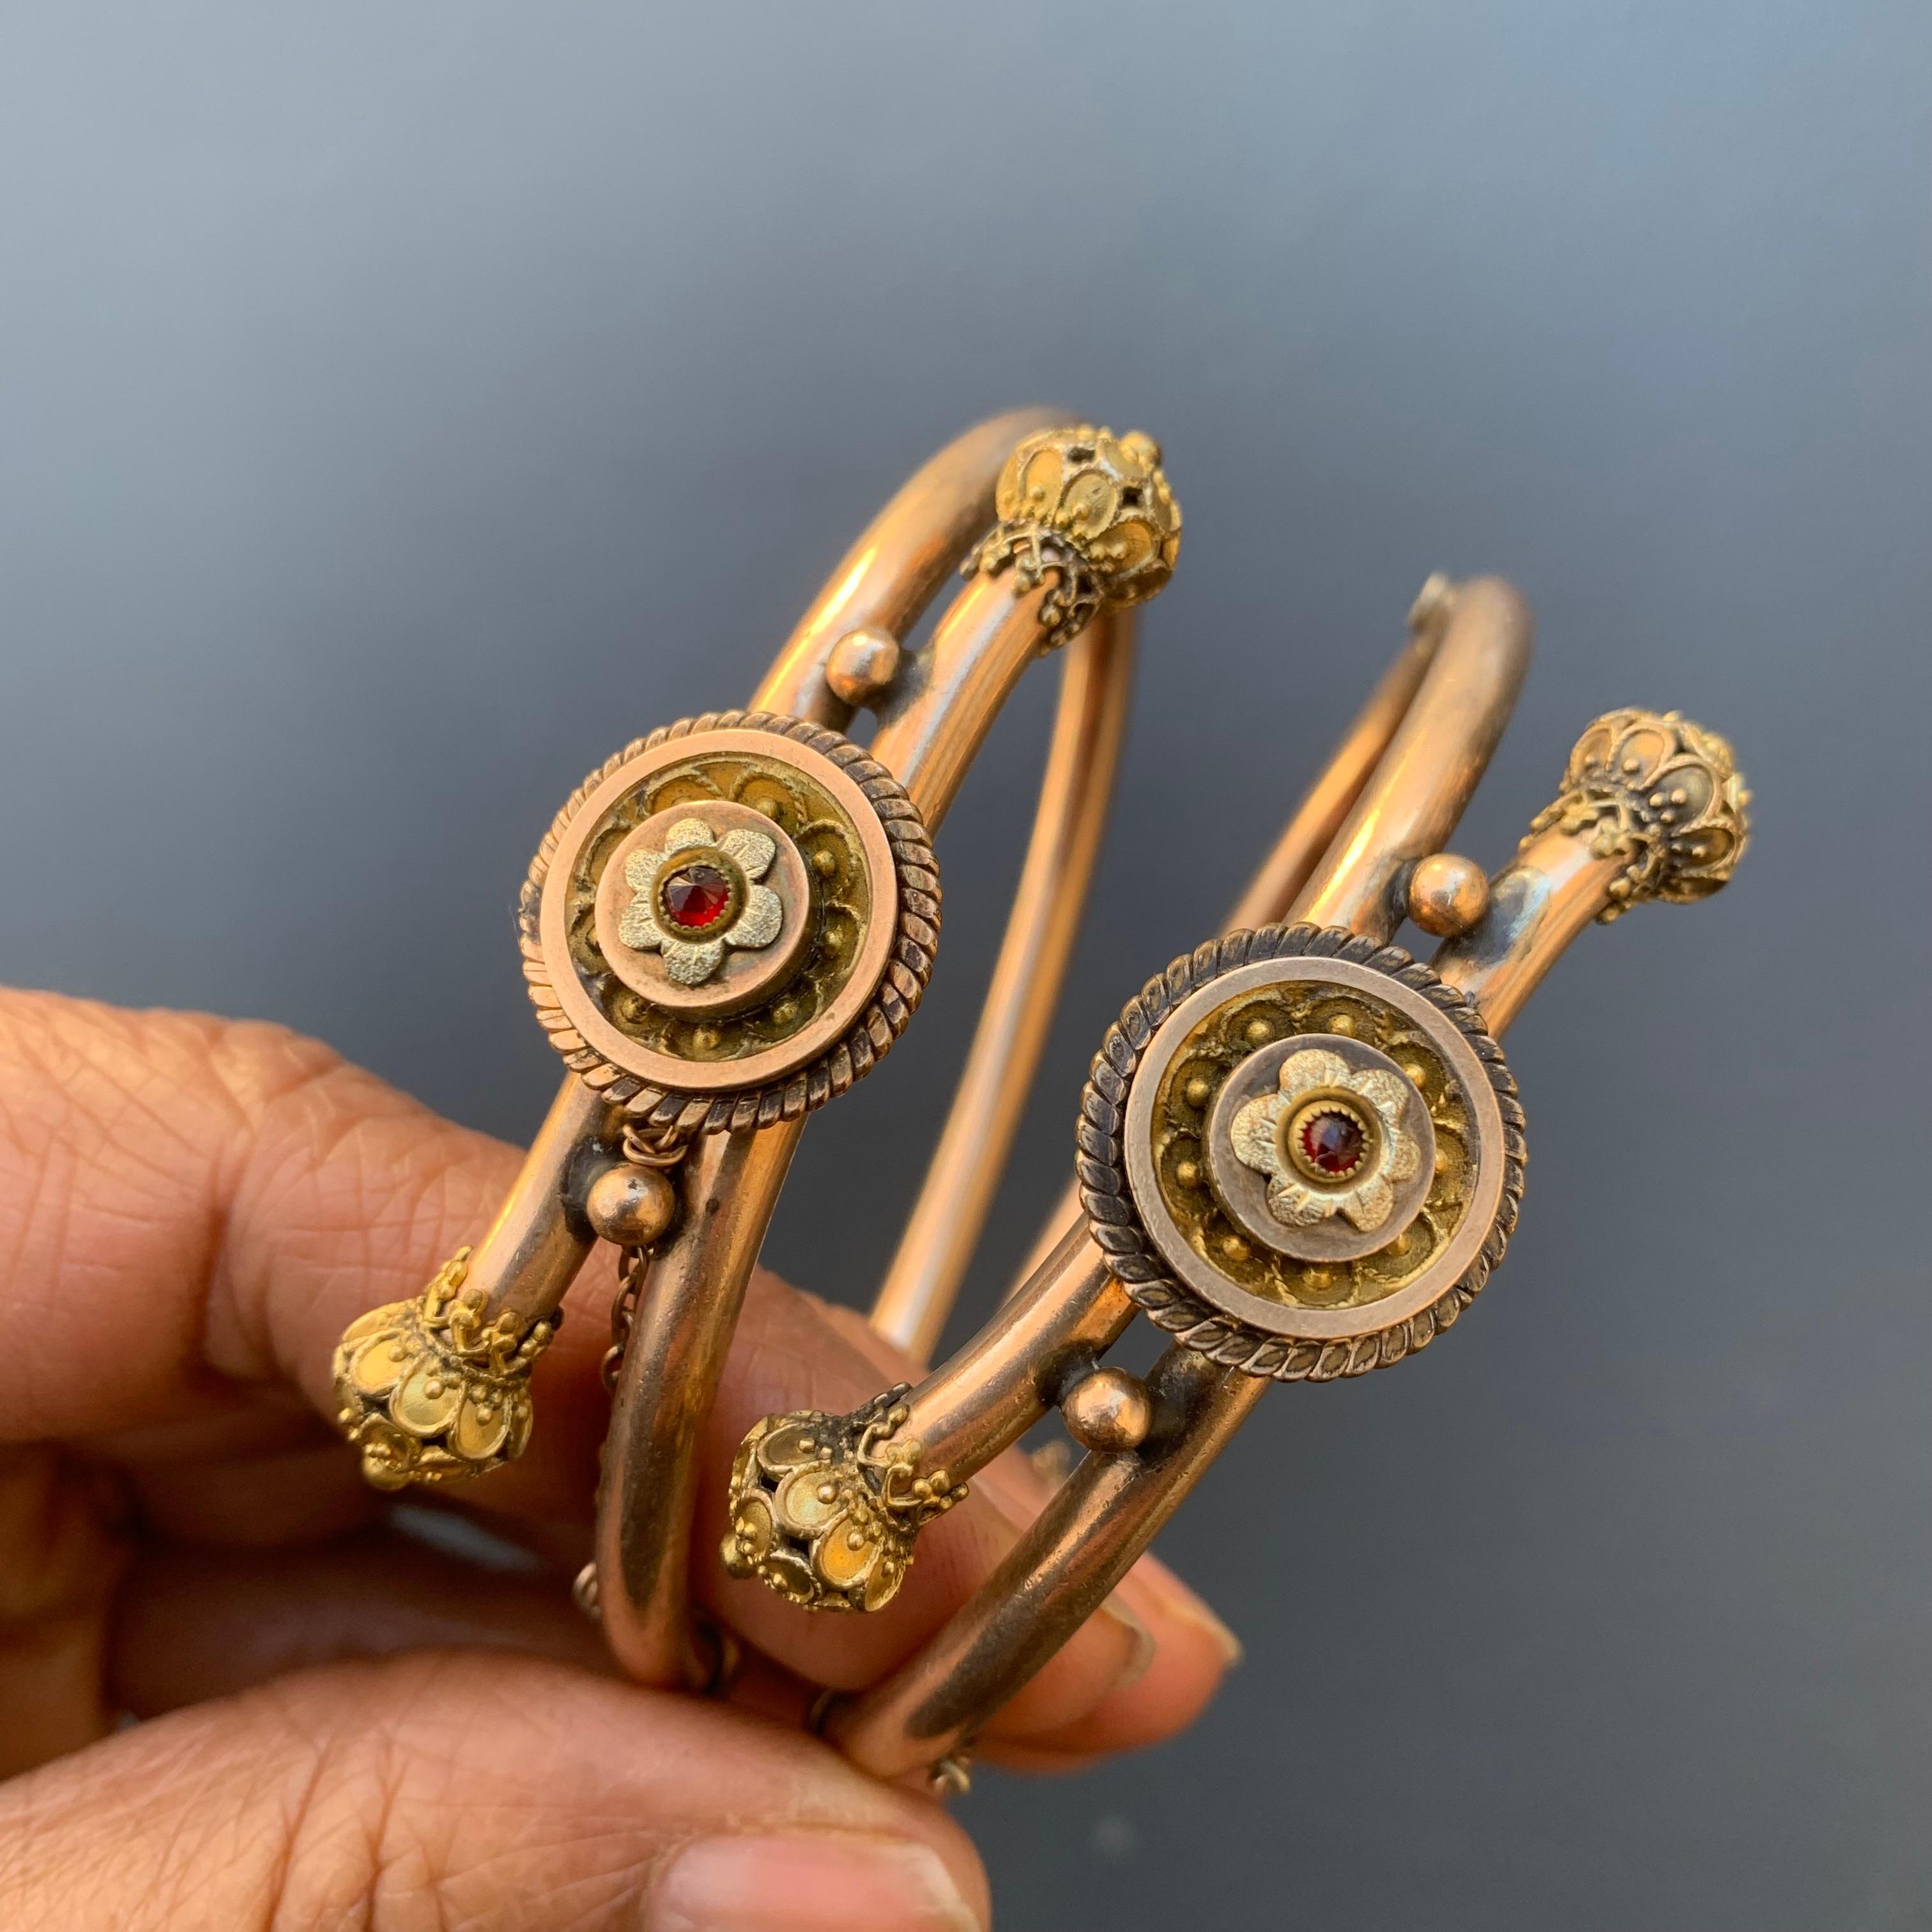 rare collectible Antique Victorian Etruscan Revival rose gold filled wedding bangle set of 2 . Each hinged bangle has applied wire and bead work with a garnet stone in center . Bangles are in two shades rose gold and yellow gold ends . Hidden tongue